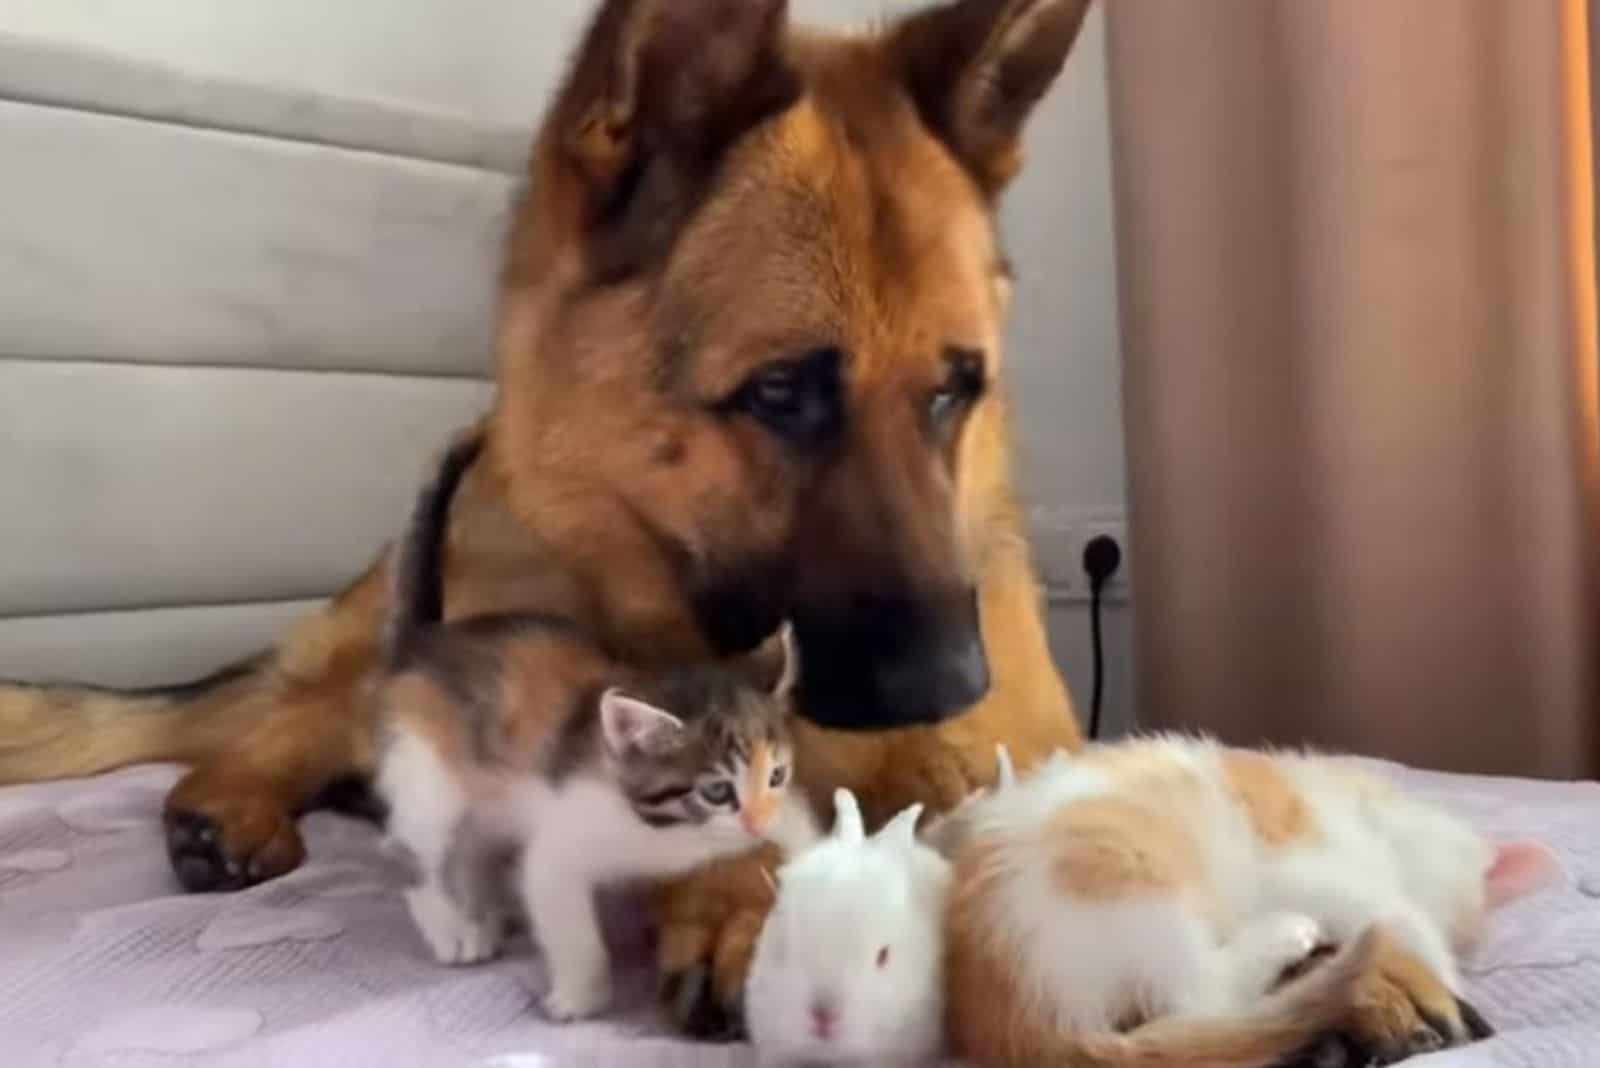 german shepherd dog playing with kittens and bunnies on the bed